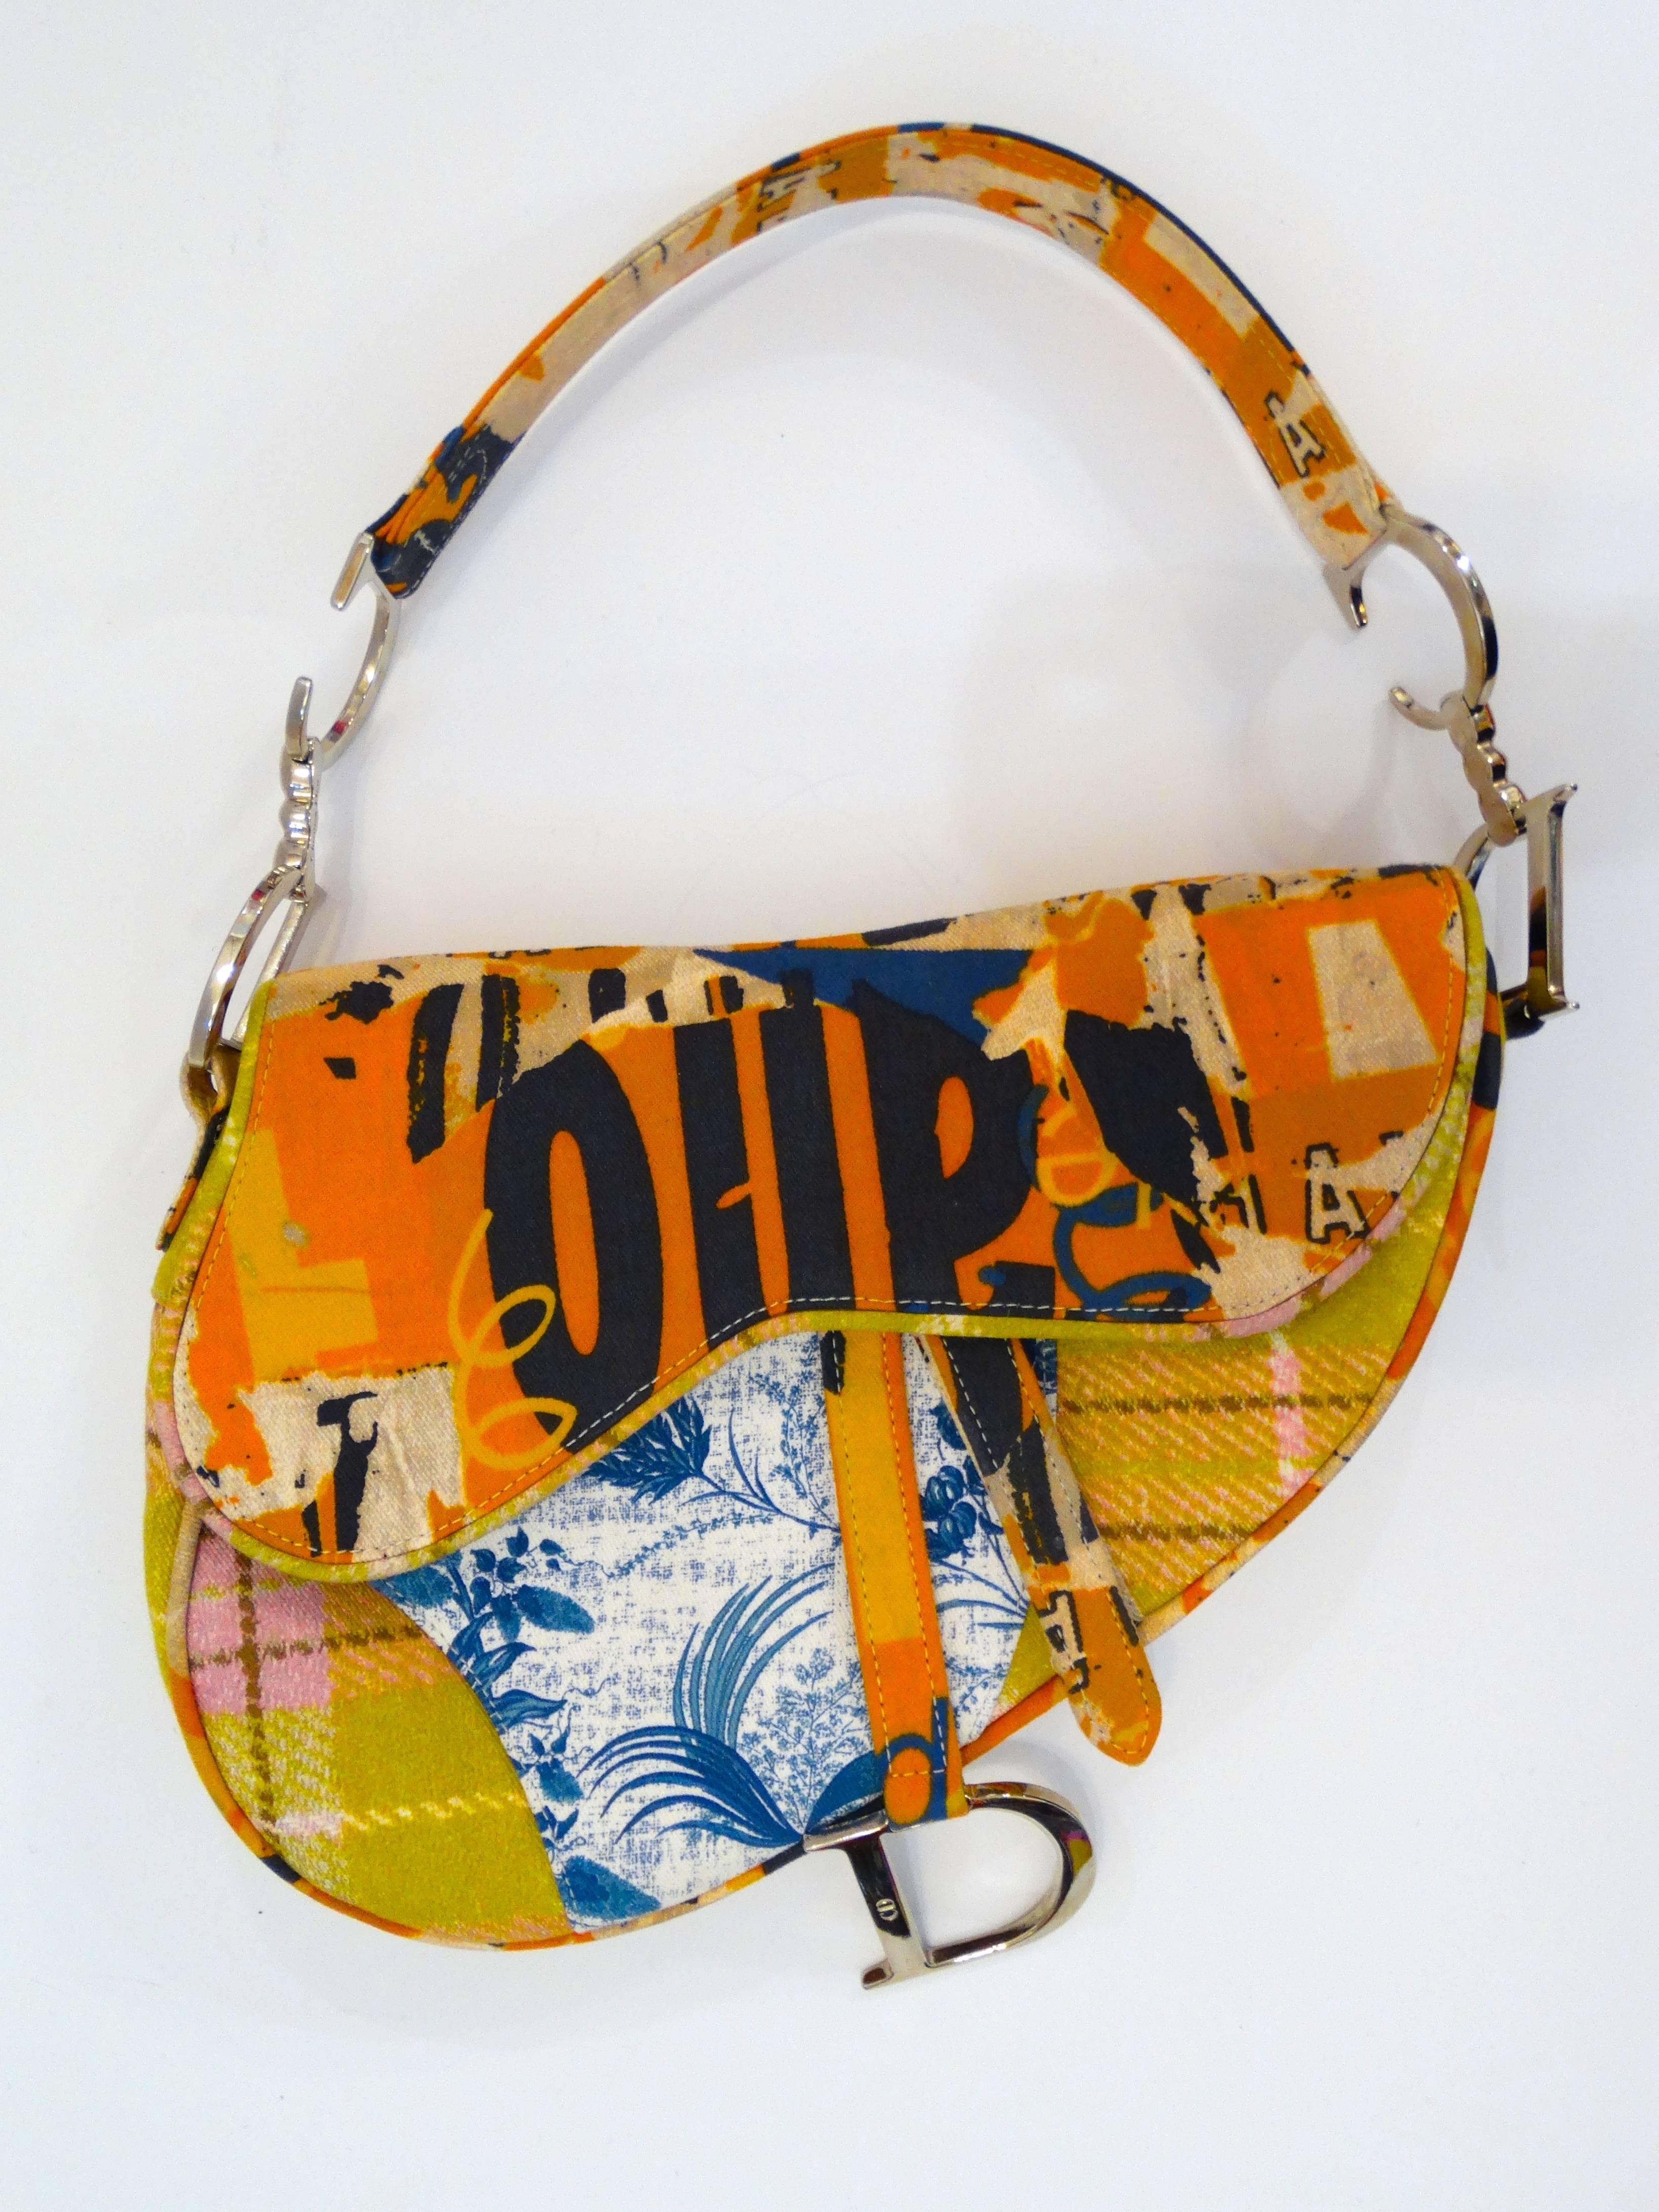 Saddle bags are back- in style, that is! The iconic Christian Dior Saddle bag of the 2000s in a bold multicolored graphic pattern. Signature CD silver hardware strap and matching Dior accent suspended from the bag closure. Top flap opens to reveal